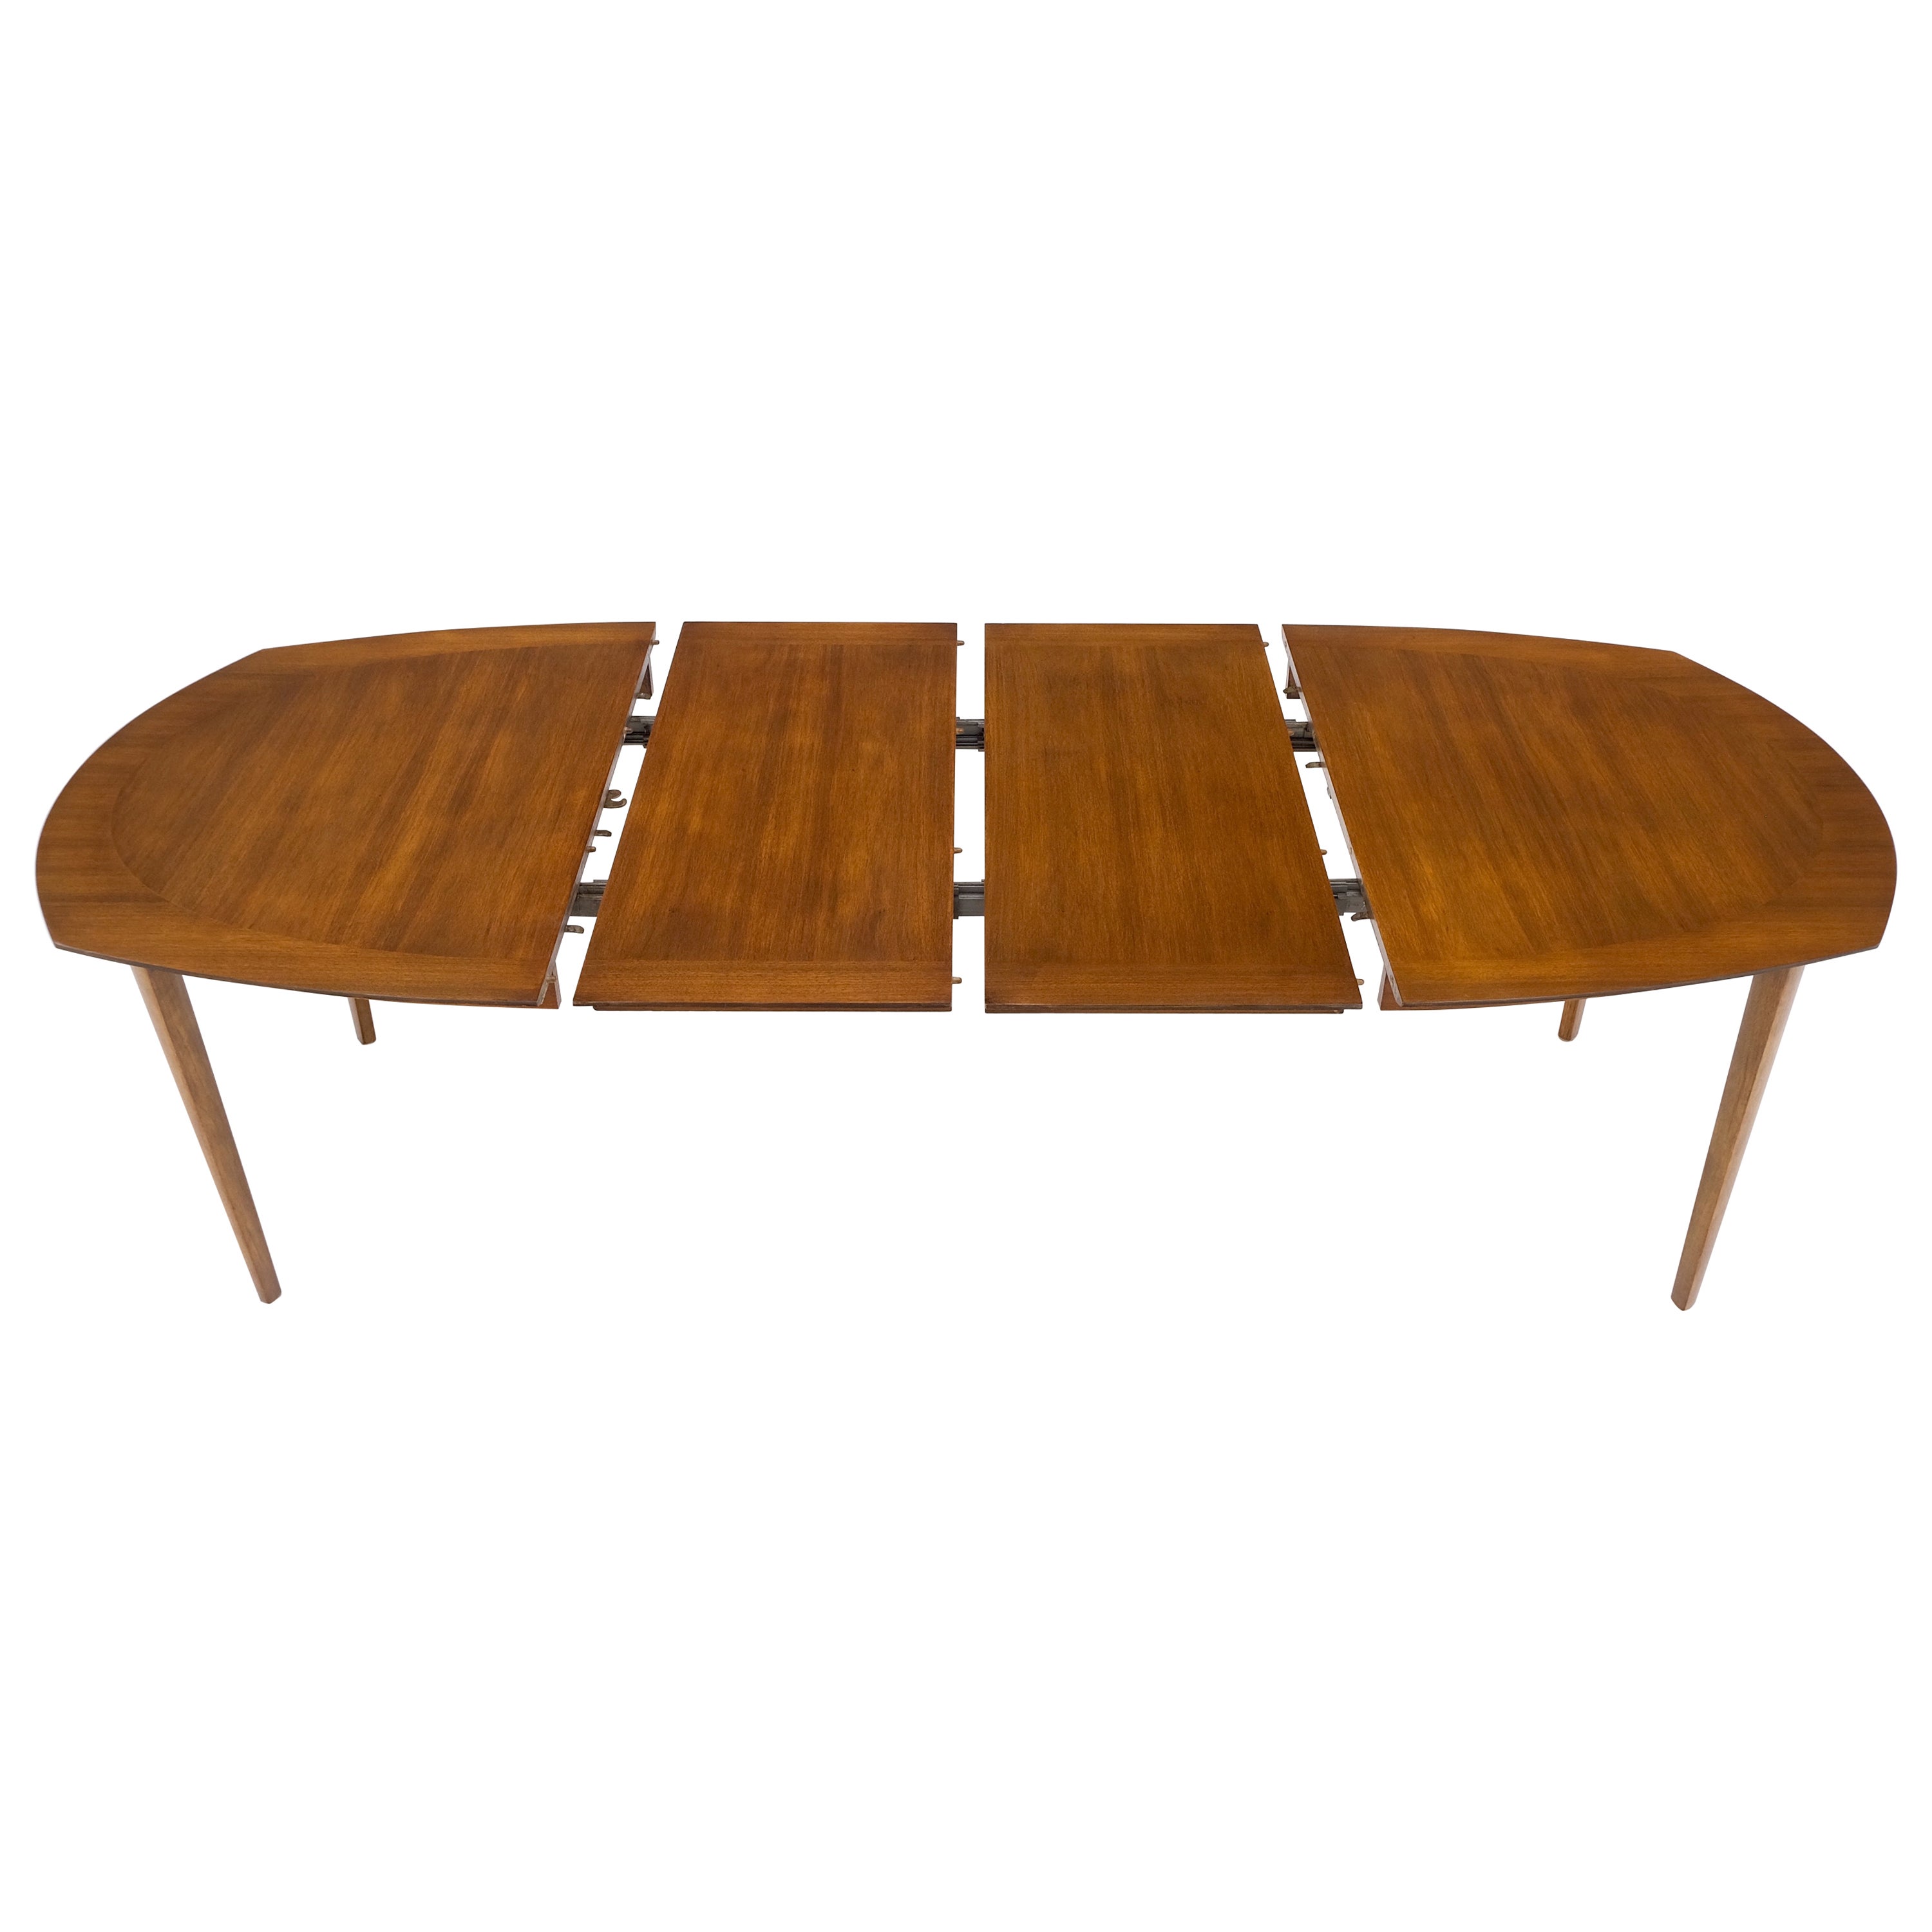 Mid Century Light Walnut Boat Oval Shape Banded Dining Table Leafs Mint!